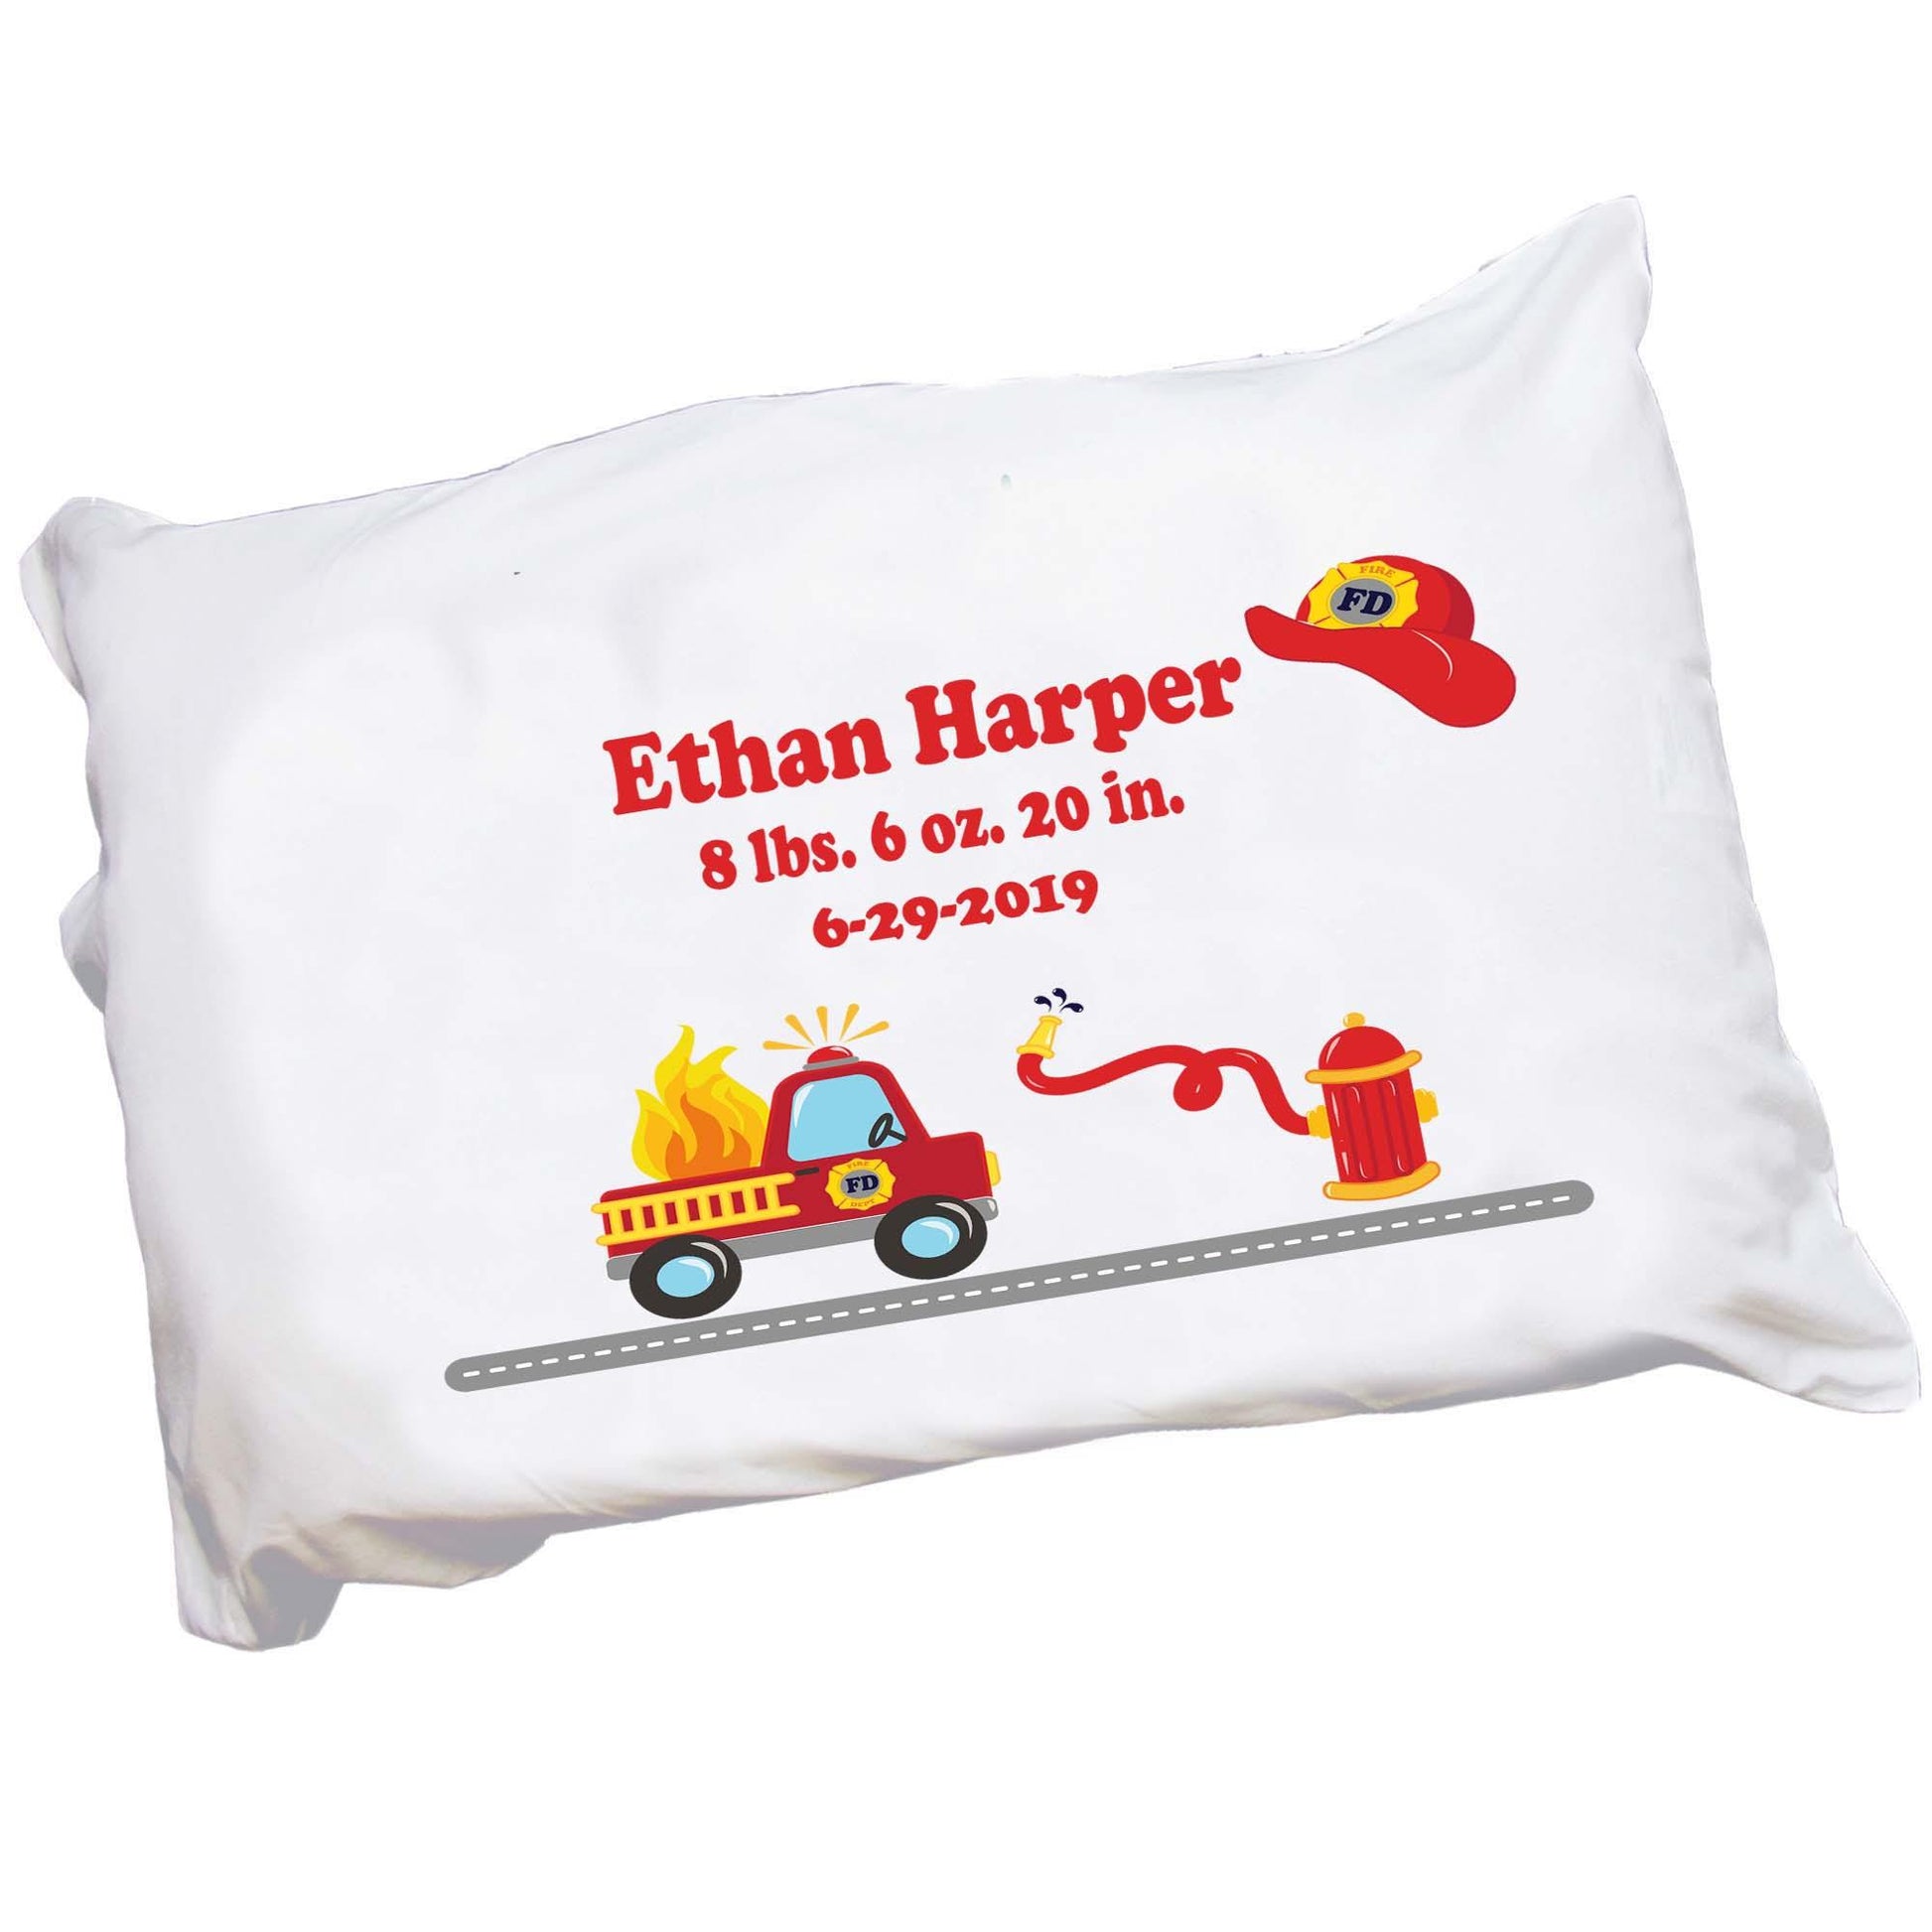 Personalized Childrens Pillowcase with Fire Truck design